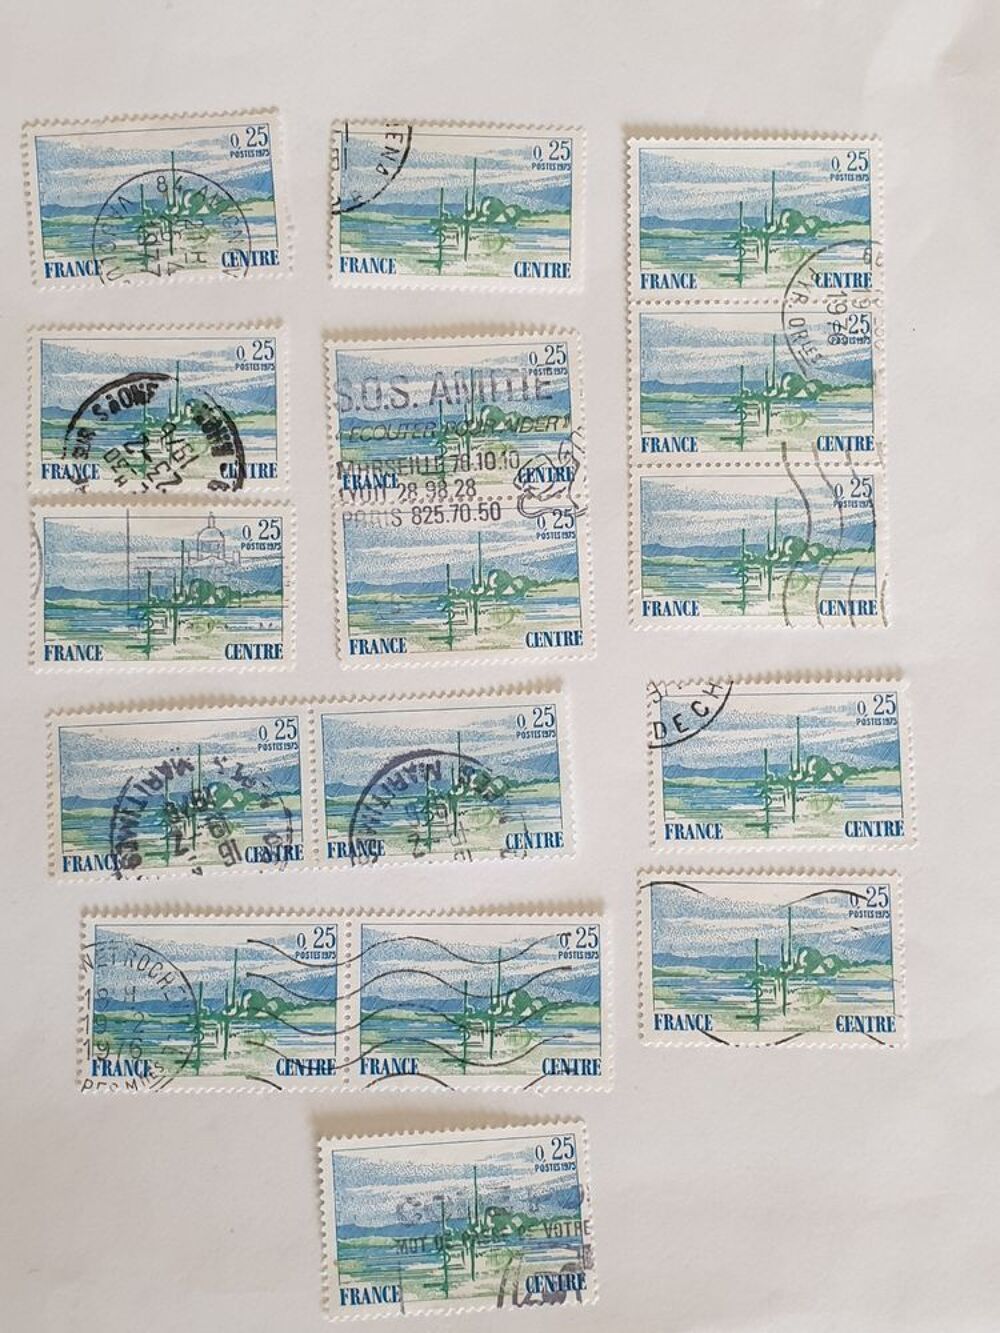 Timbre france R&eacute;gion Centre 1976- lot 0.80 euro 